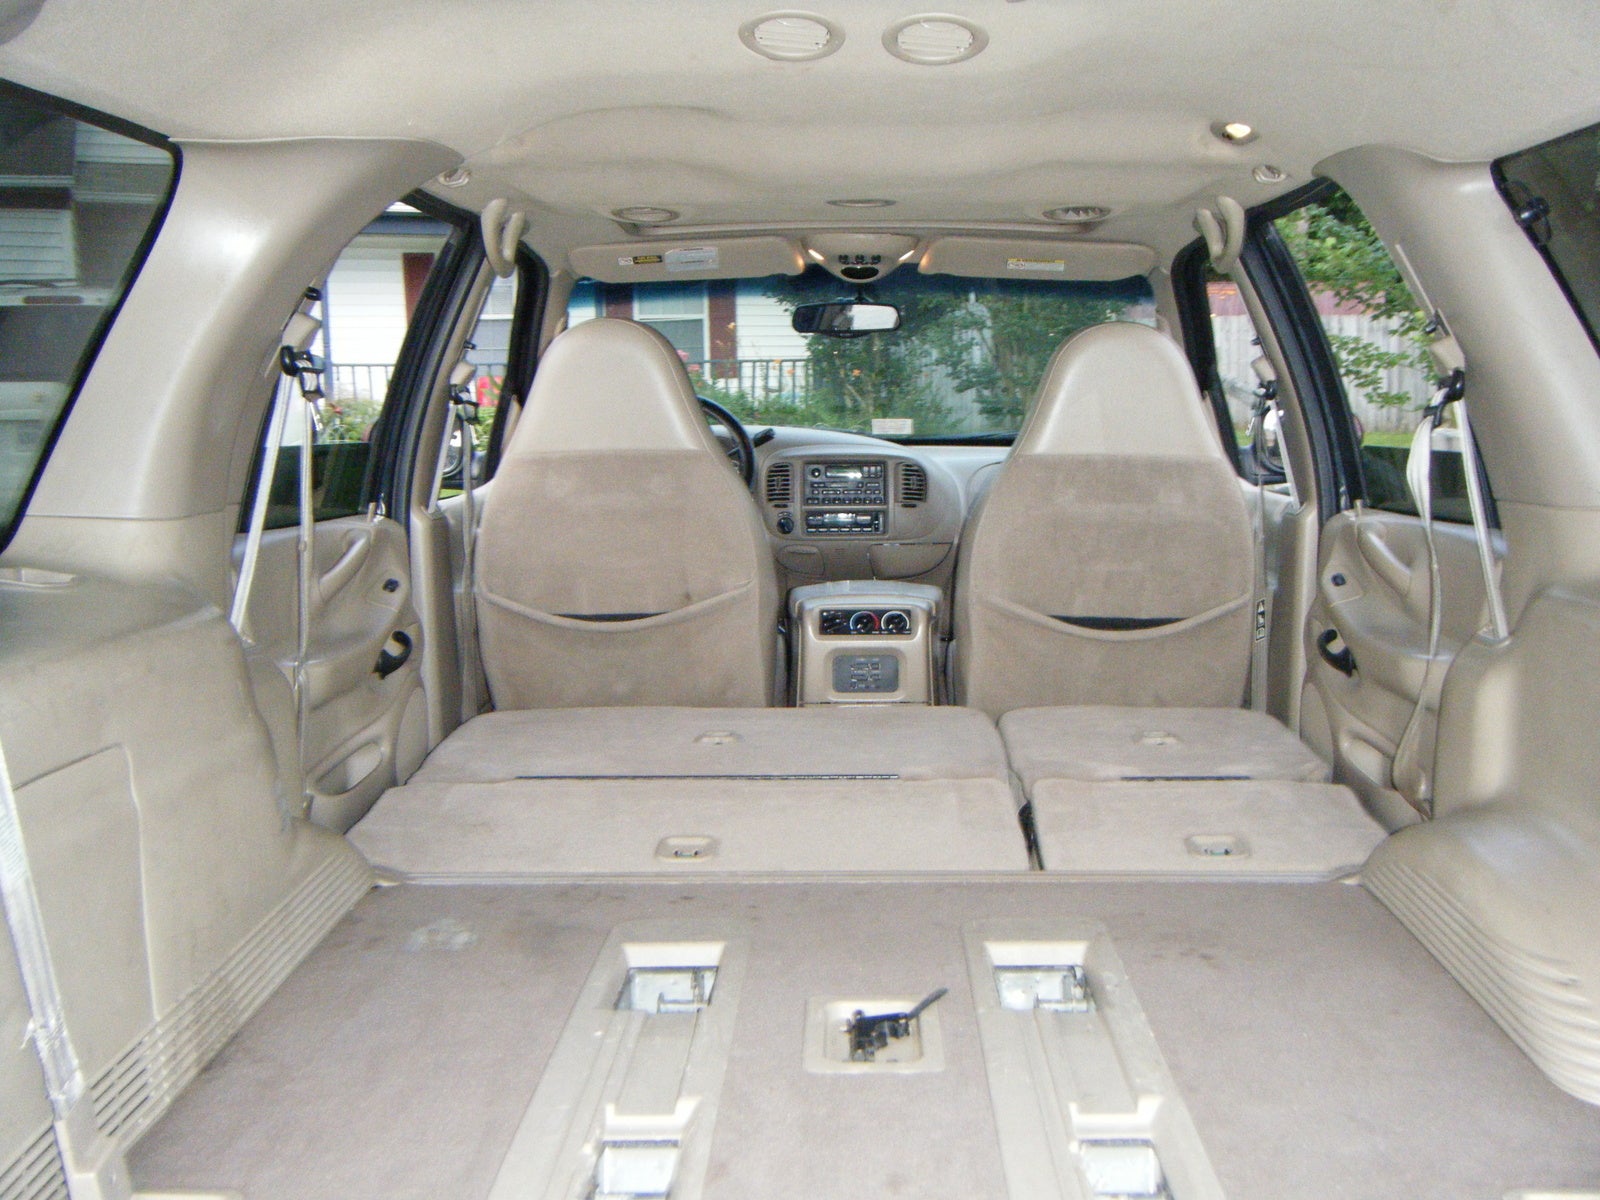 2000 Ford expedition interior photos #6